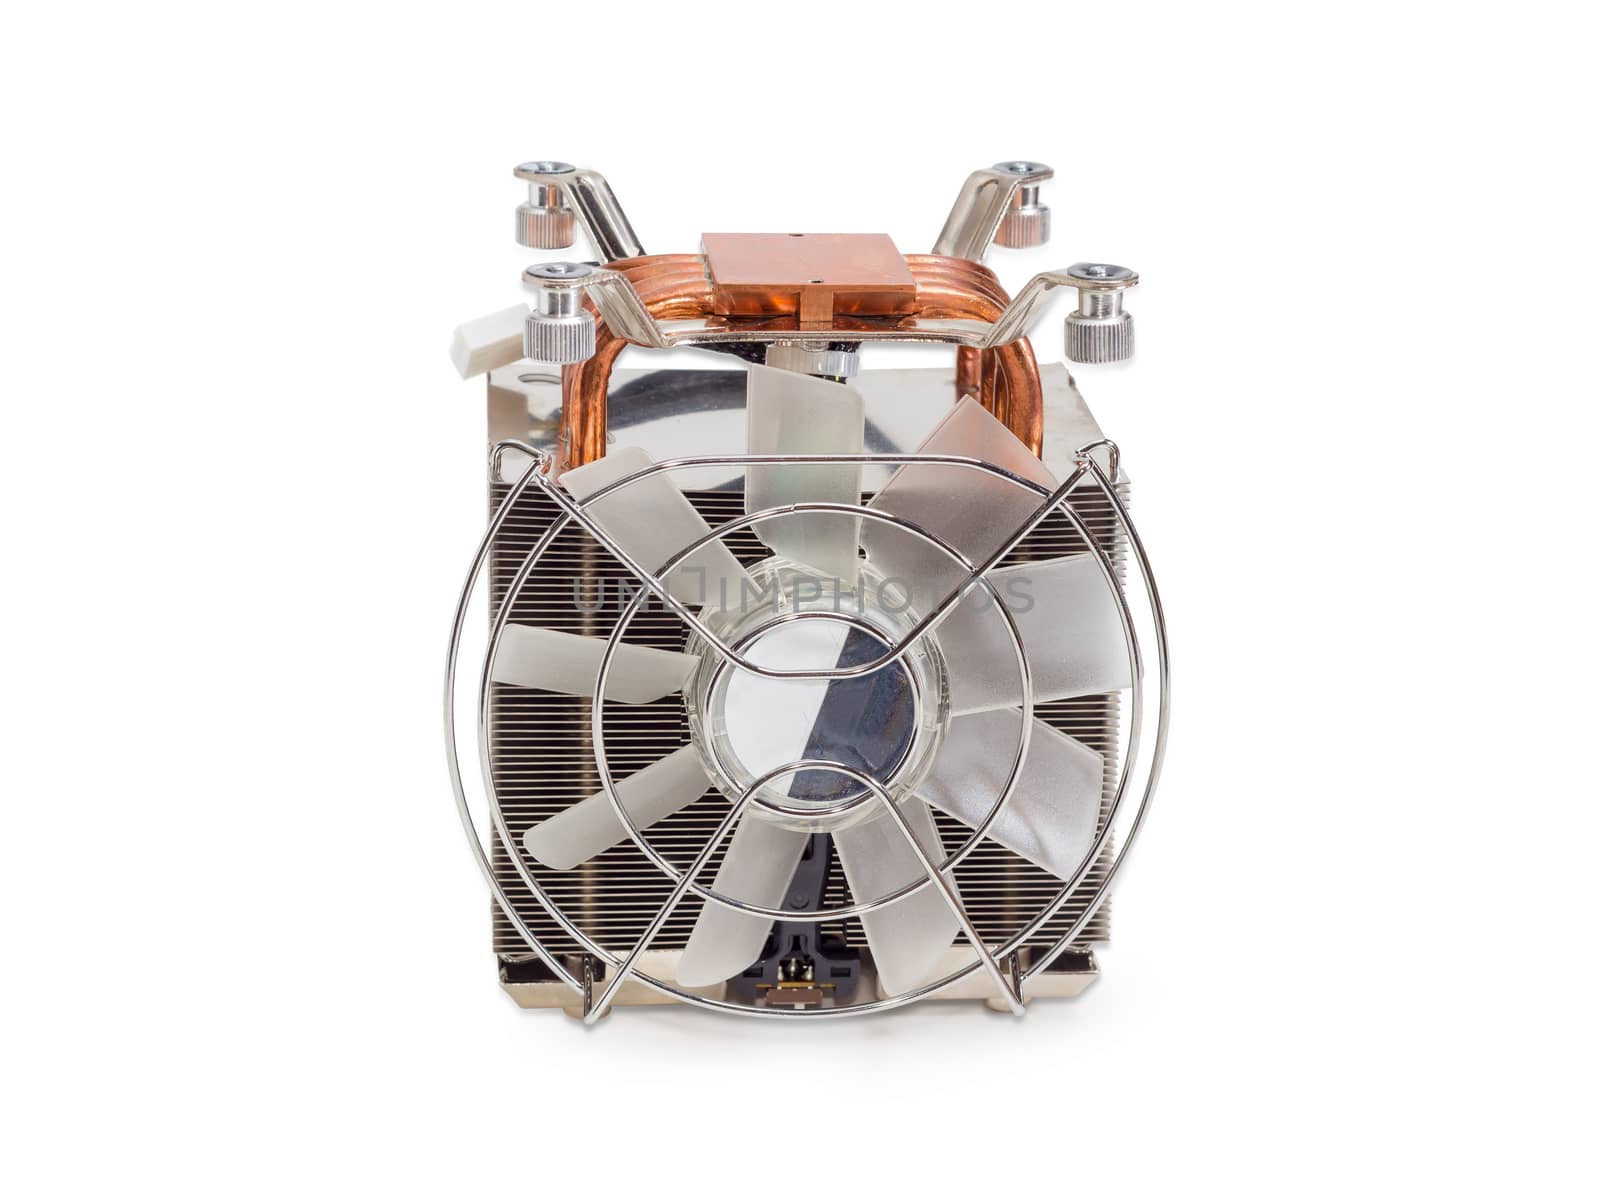 Active CPU cooler with fan and copper heat pipes by anmbph